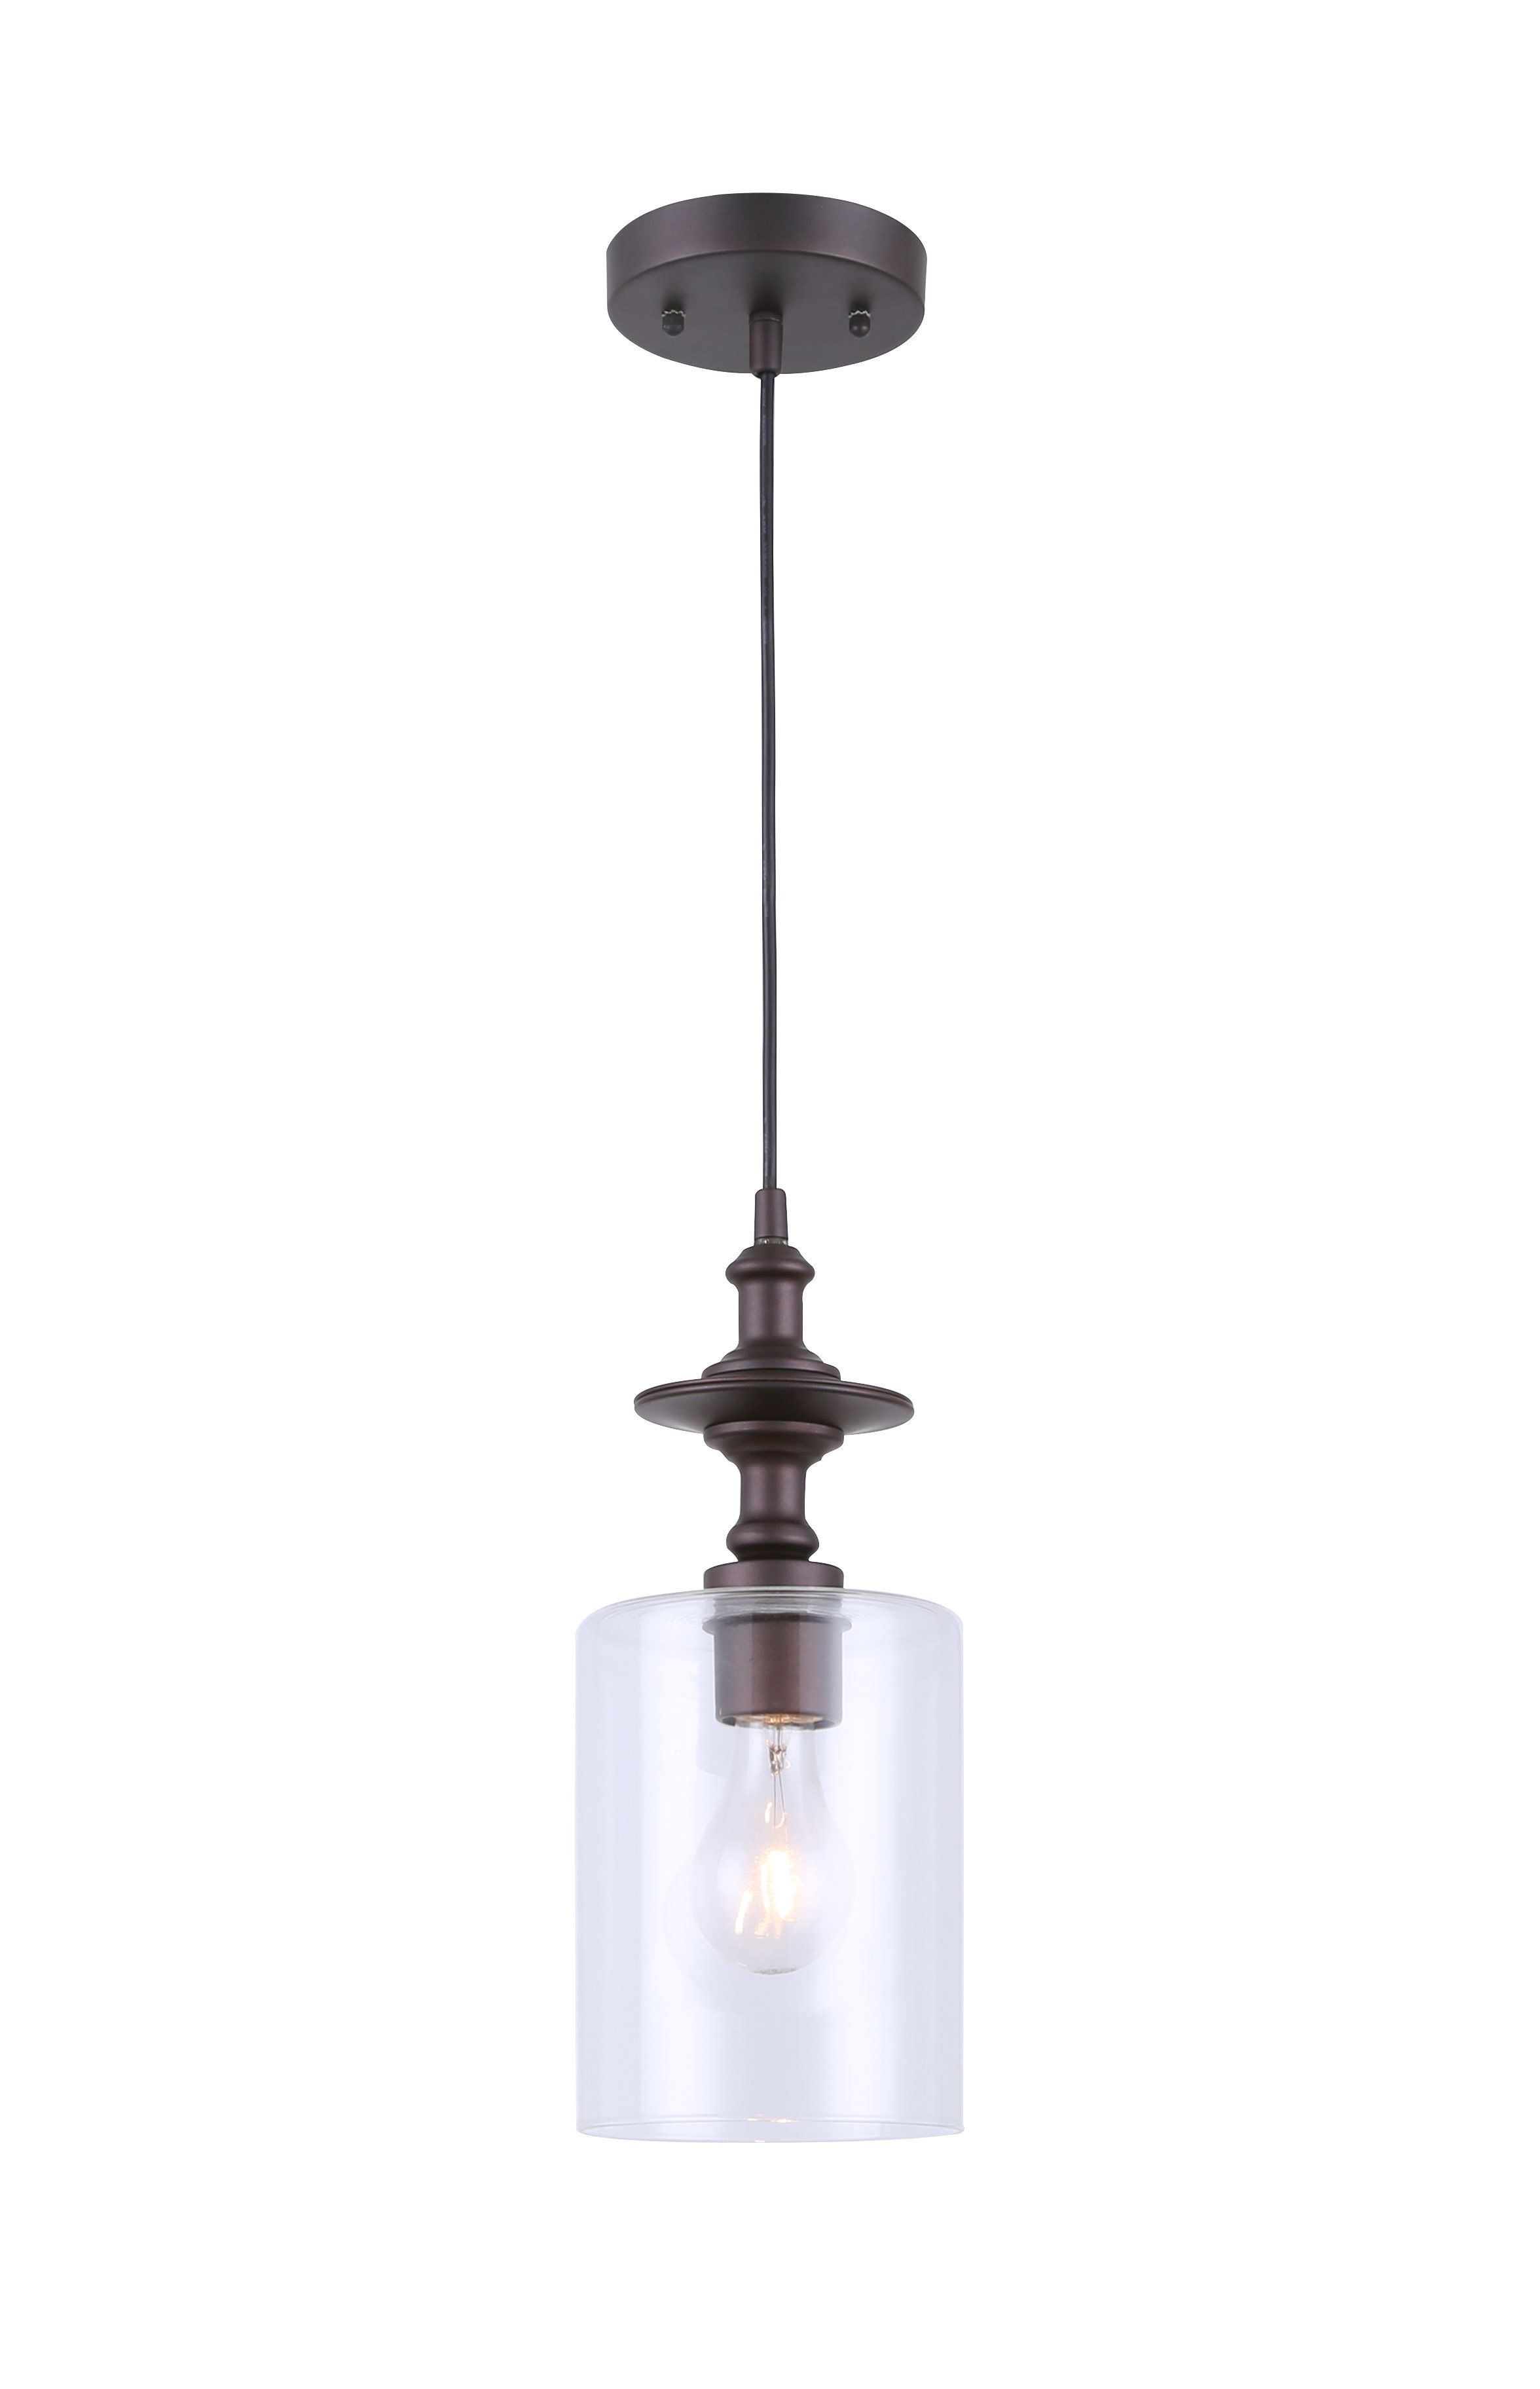 Farmhouse & Rustic Cylinder Pendants | Birch Lane Within Barrons 1 Light Single Cylinder Pendants (View 12 of 30)